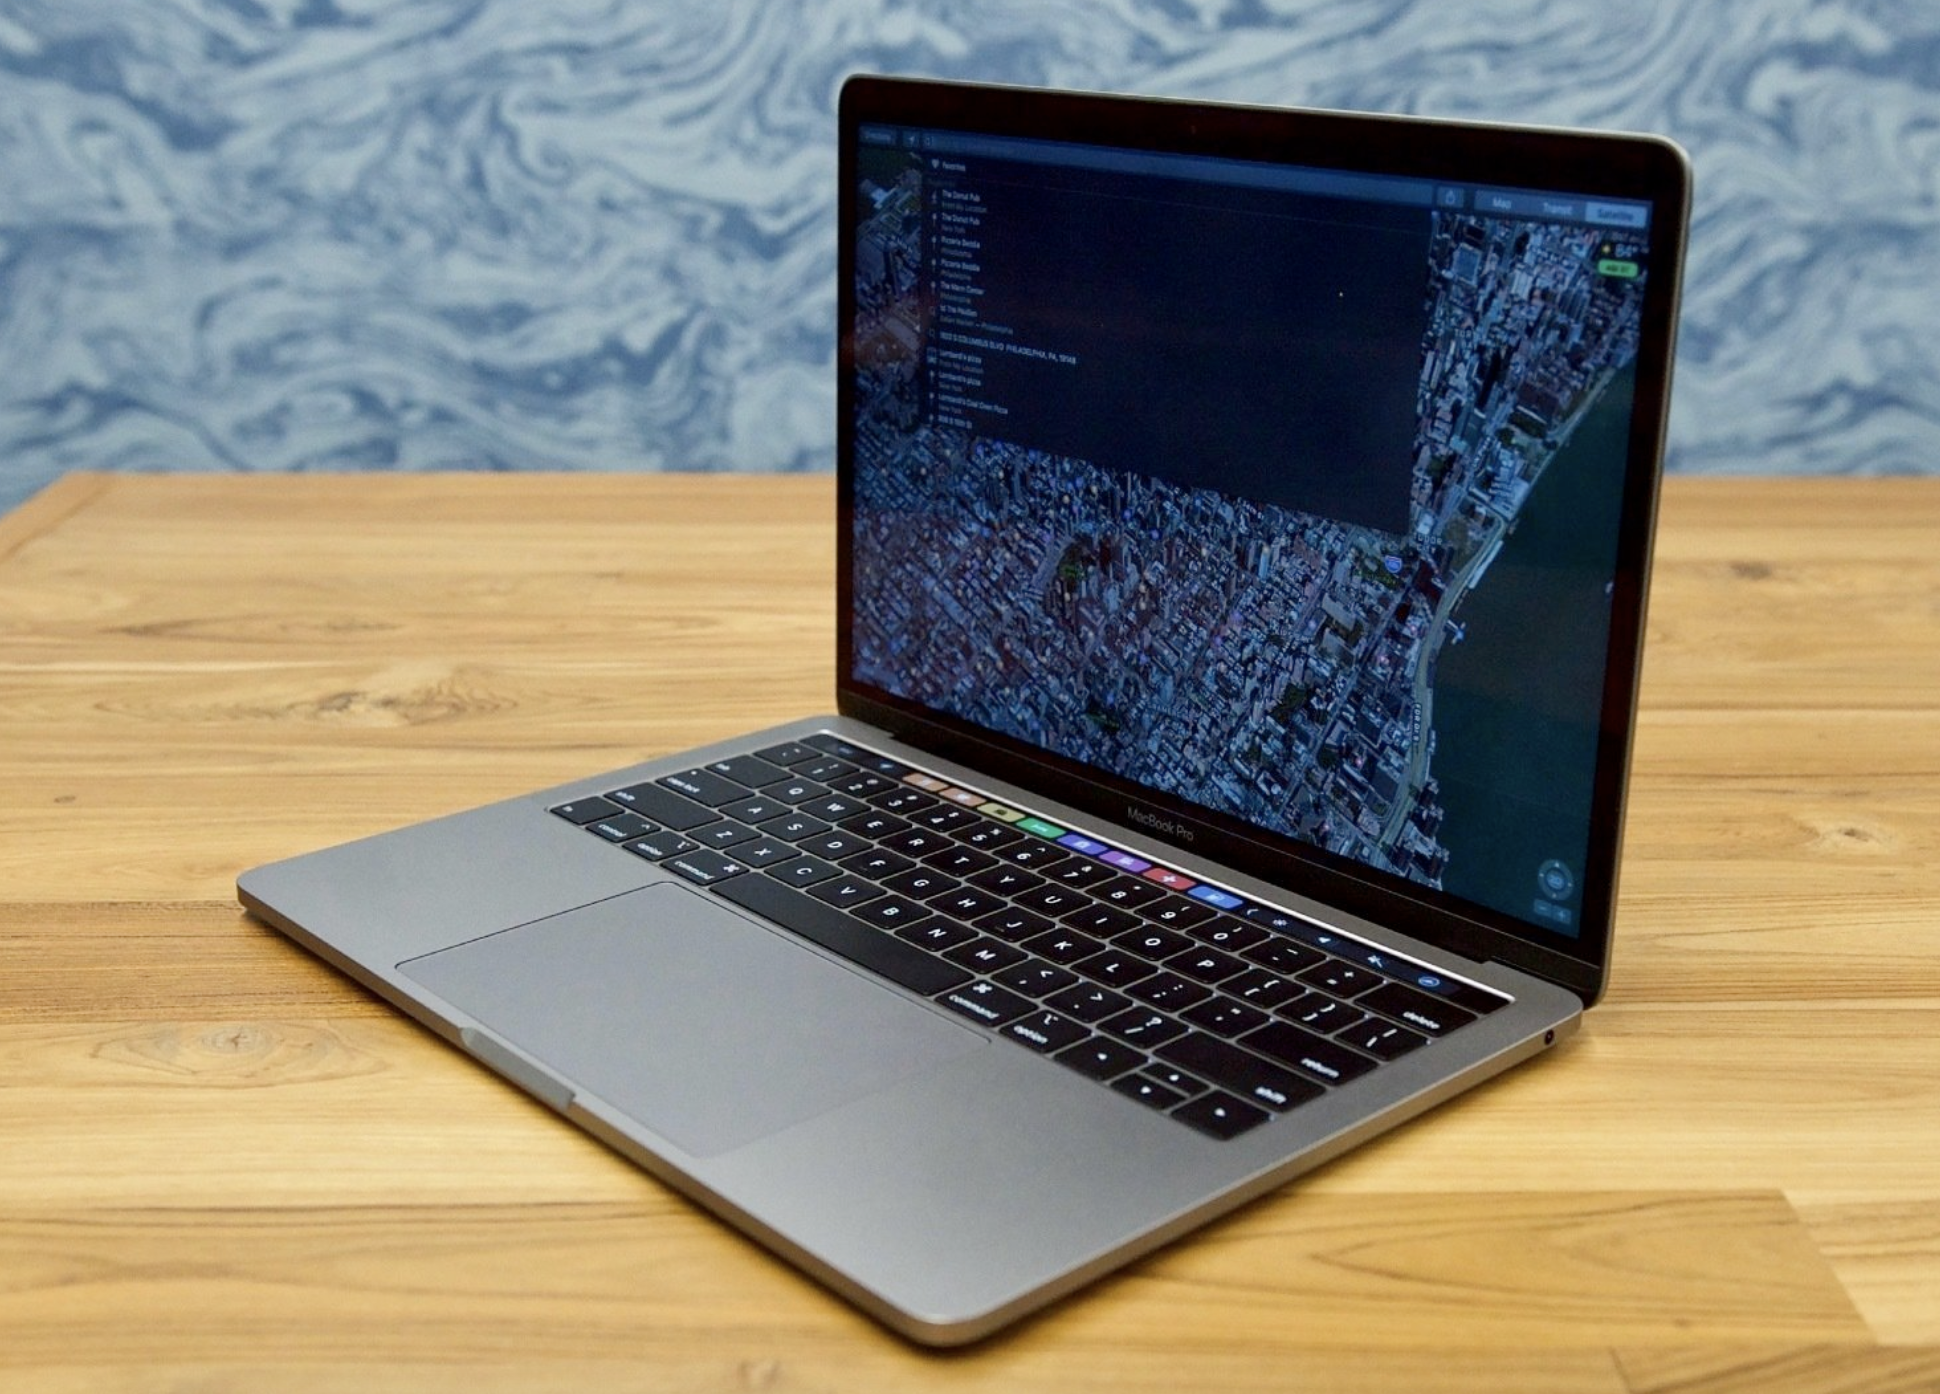 Apple confirms shutdown issue with the 2019 13-inch MacBook Pro.